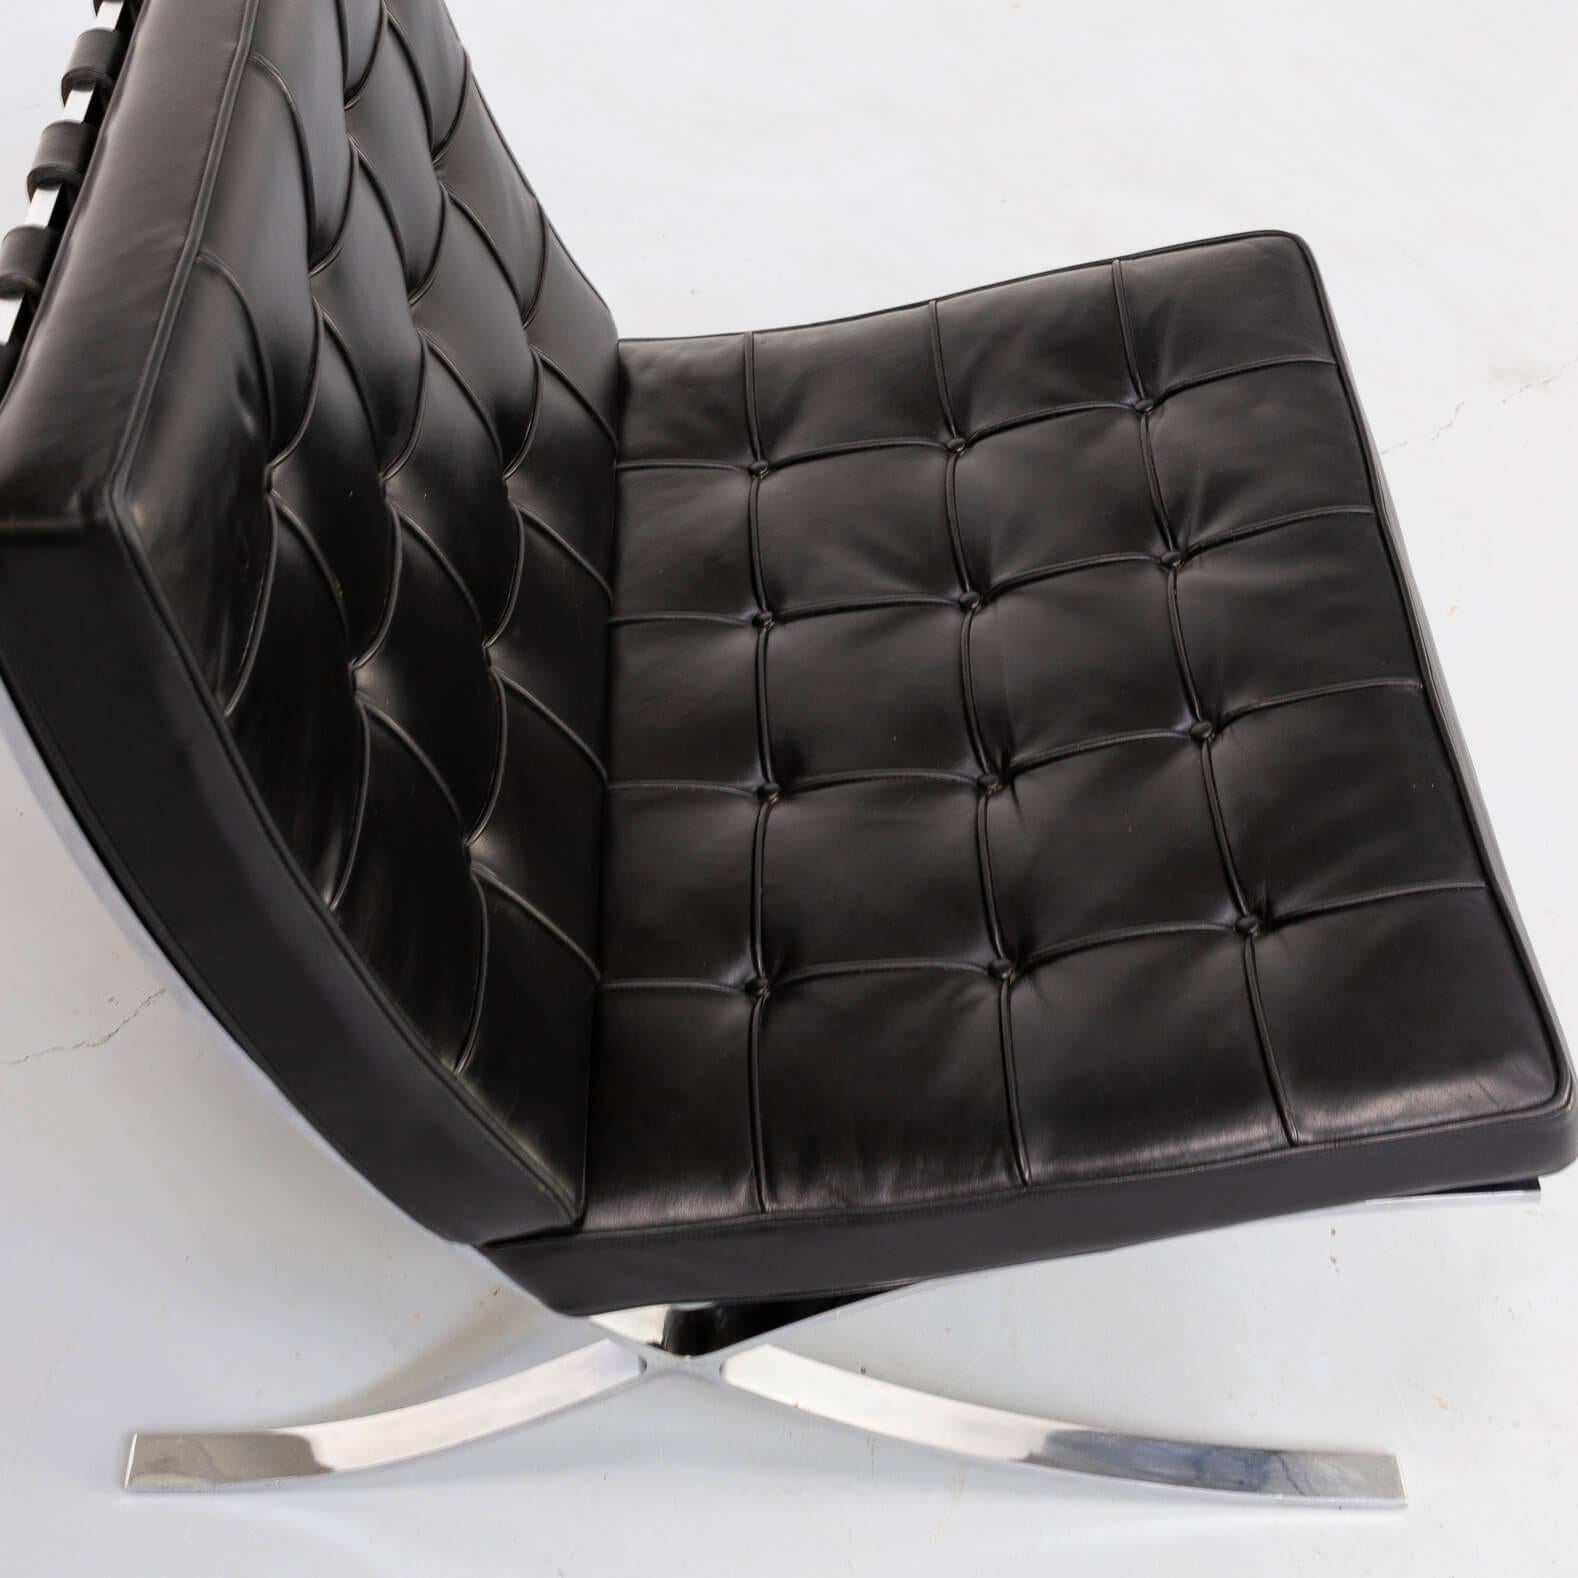 1930s Mies van der Rohe ‘Barcelona’ Chair for Knoll For Sale 1